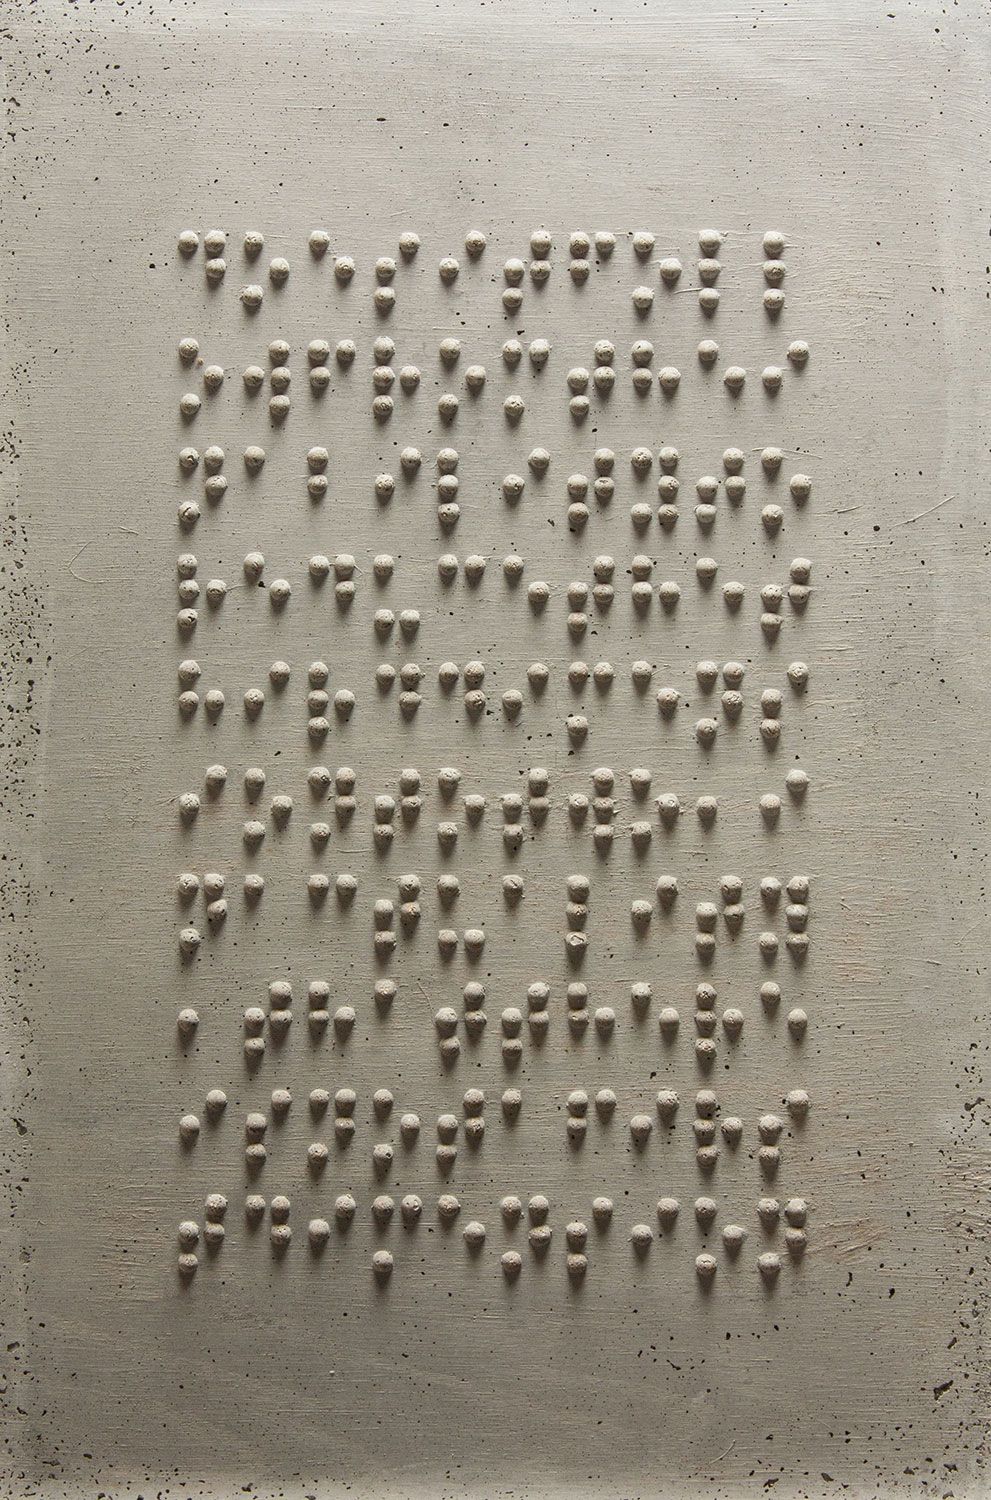 Jere Williams, Tablet, 2012. Giclee on canvas (of a concrete casting), 25 x 15 in.